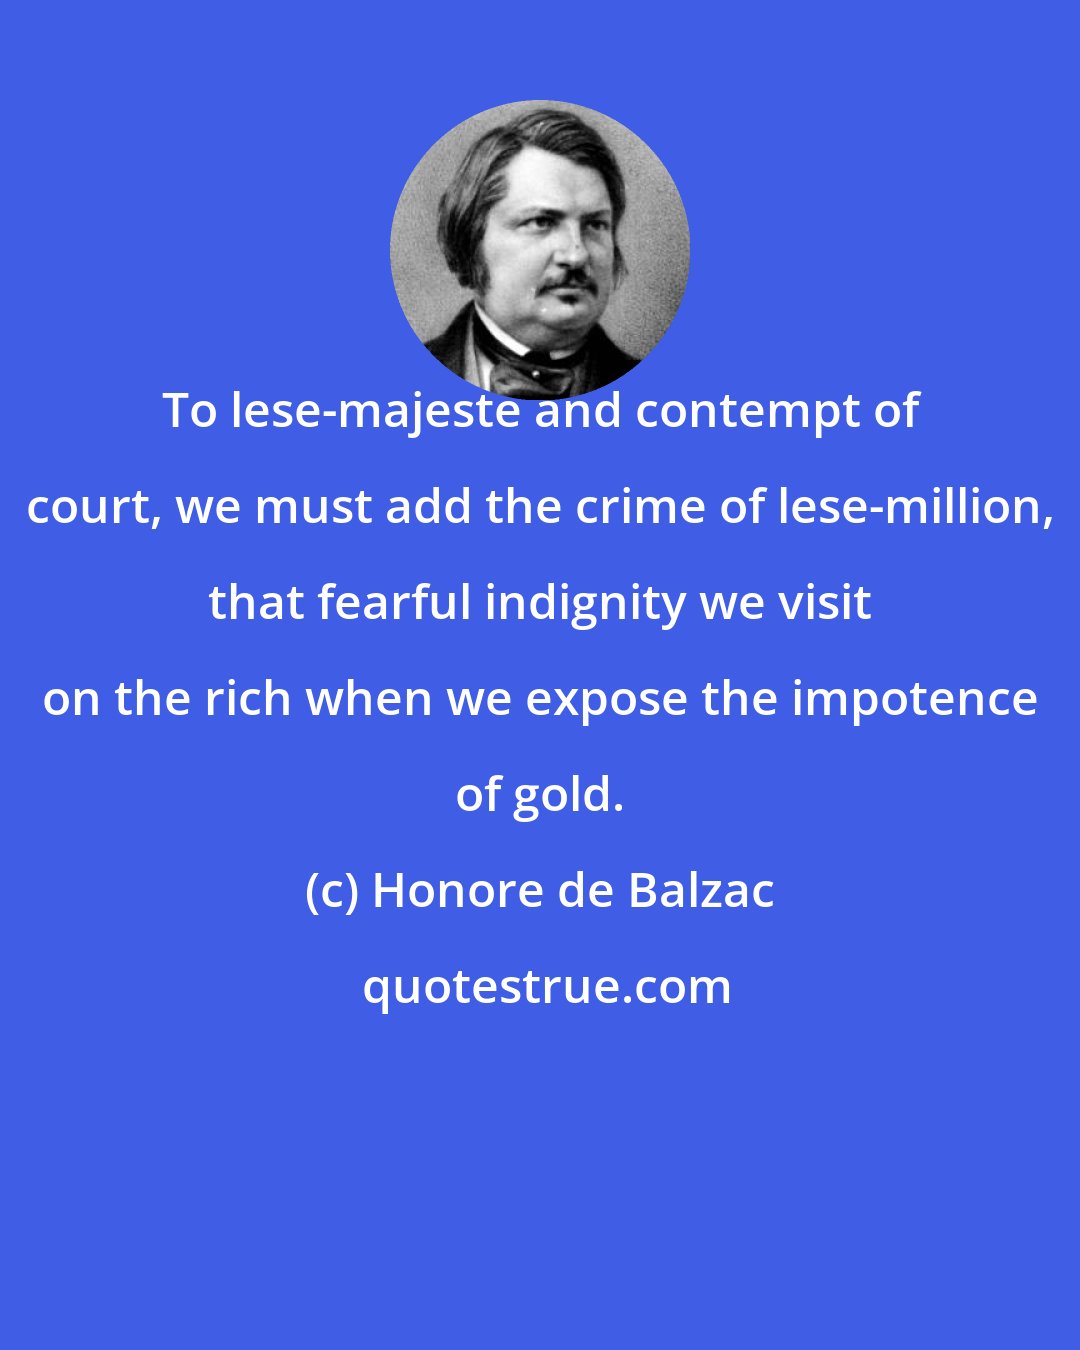 Honore de Balzac: To lese-majeste and contempt of court, we must add the crime of lese-million, that fearful indignity we visit on the rich when we expose the impotence of gold.